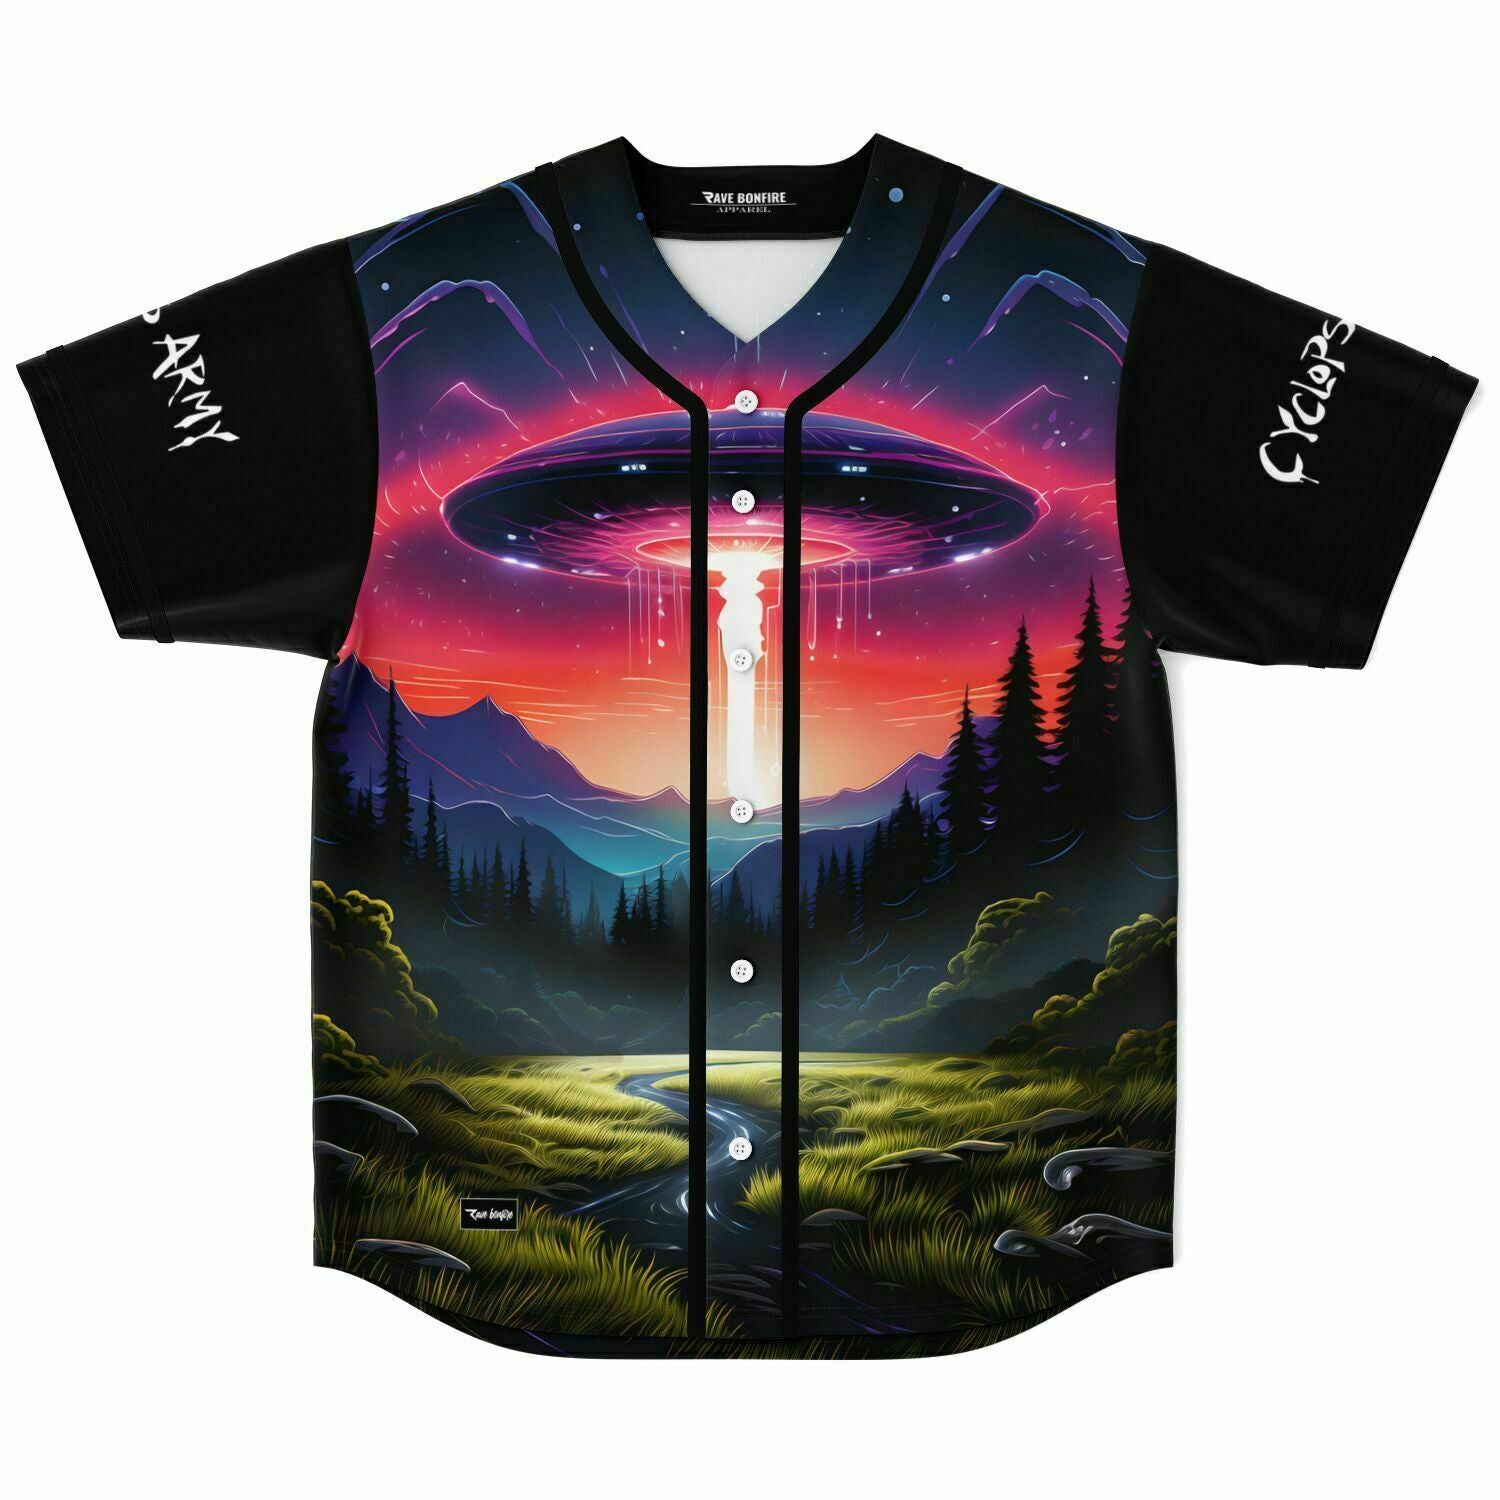 A Cyclops Alien baseball jersey with an image of a spaceship in the sky.